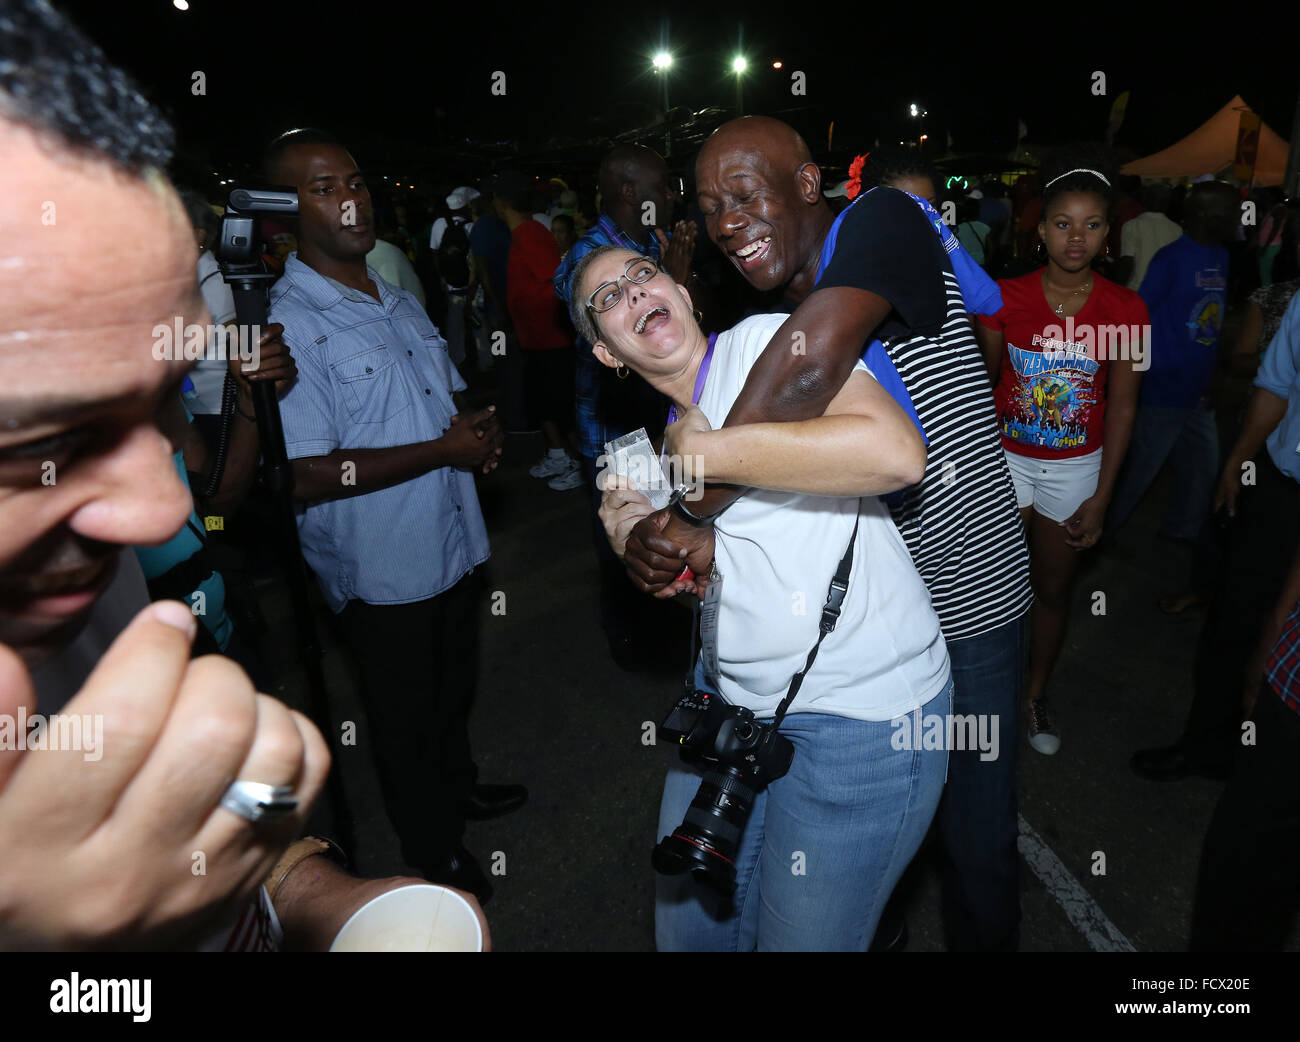 Port of Spain, Trinidad. 24th January, 2016. Keith Christopher Rowley (C), Prime Minister of Trinidad & Tobago, hugs Maria Nunes at the semi-finals of Panorama in the Queen's Park Savannah during Carnival in Port of Spain, Trinidad on Sunday January 24, 2016. (Photo by Sean Drakes/Latin Content/Getty Images) Stock Photo